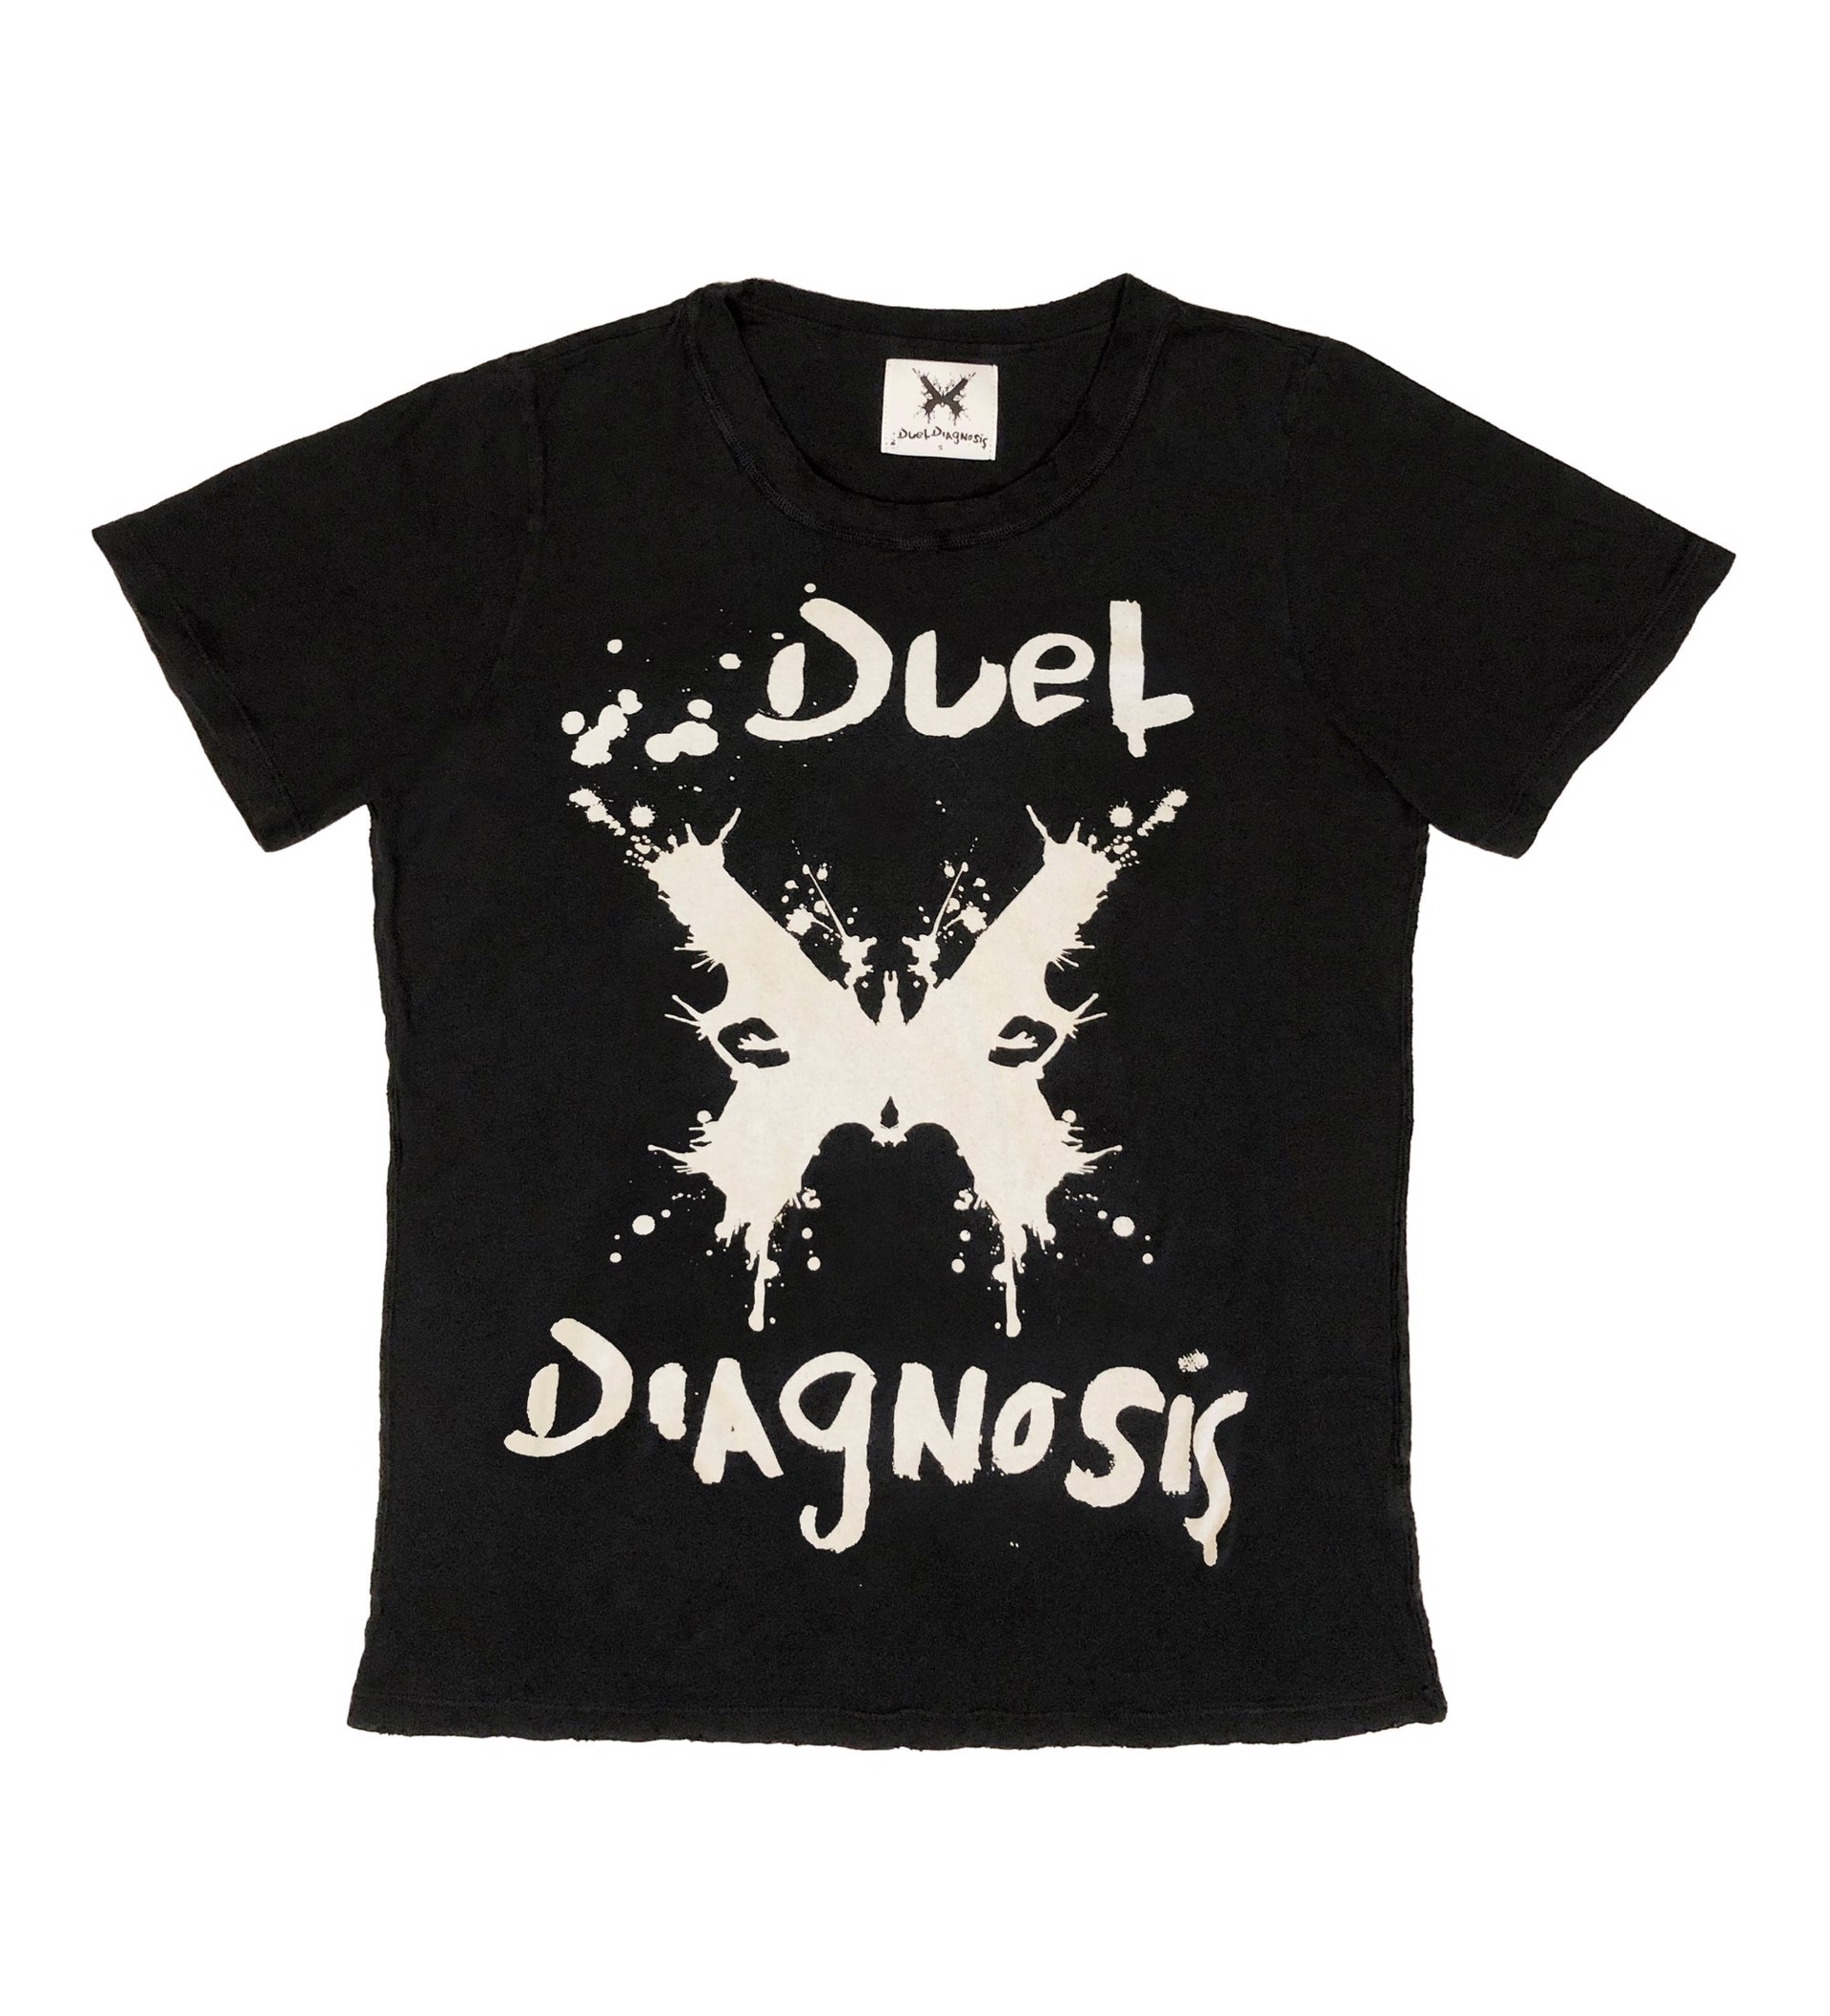 Duel Diagnosis Emblem T Shirt- Extra Small by Duel Diagnosis